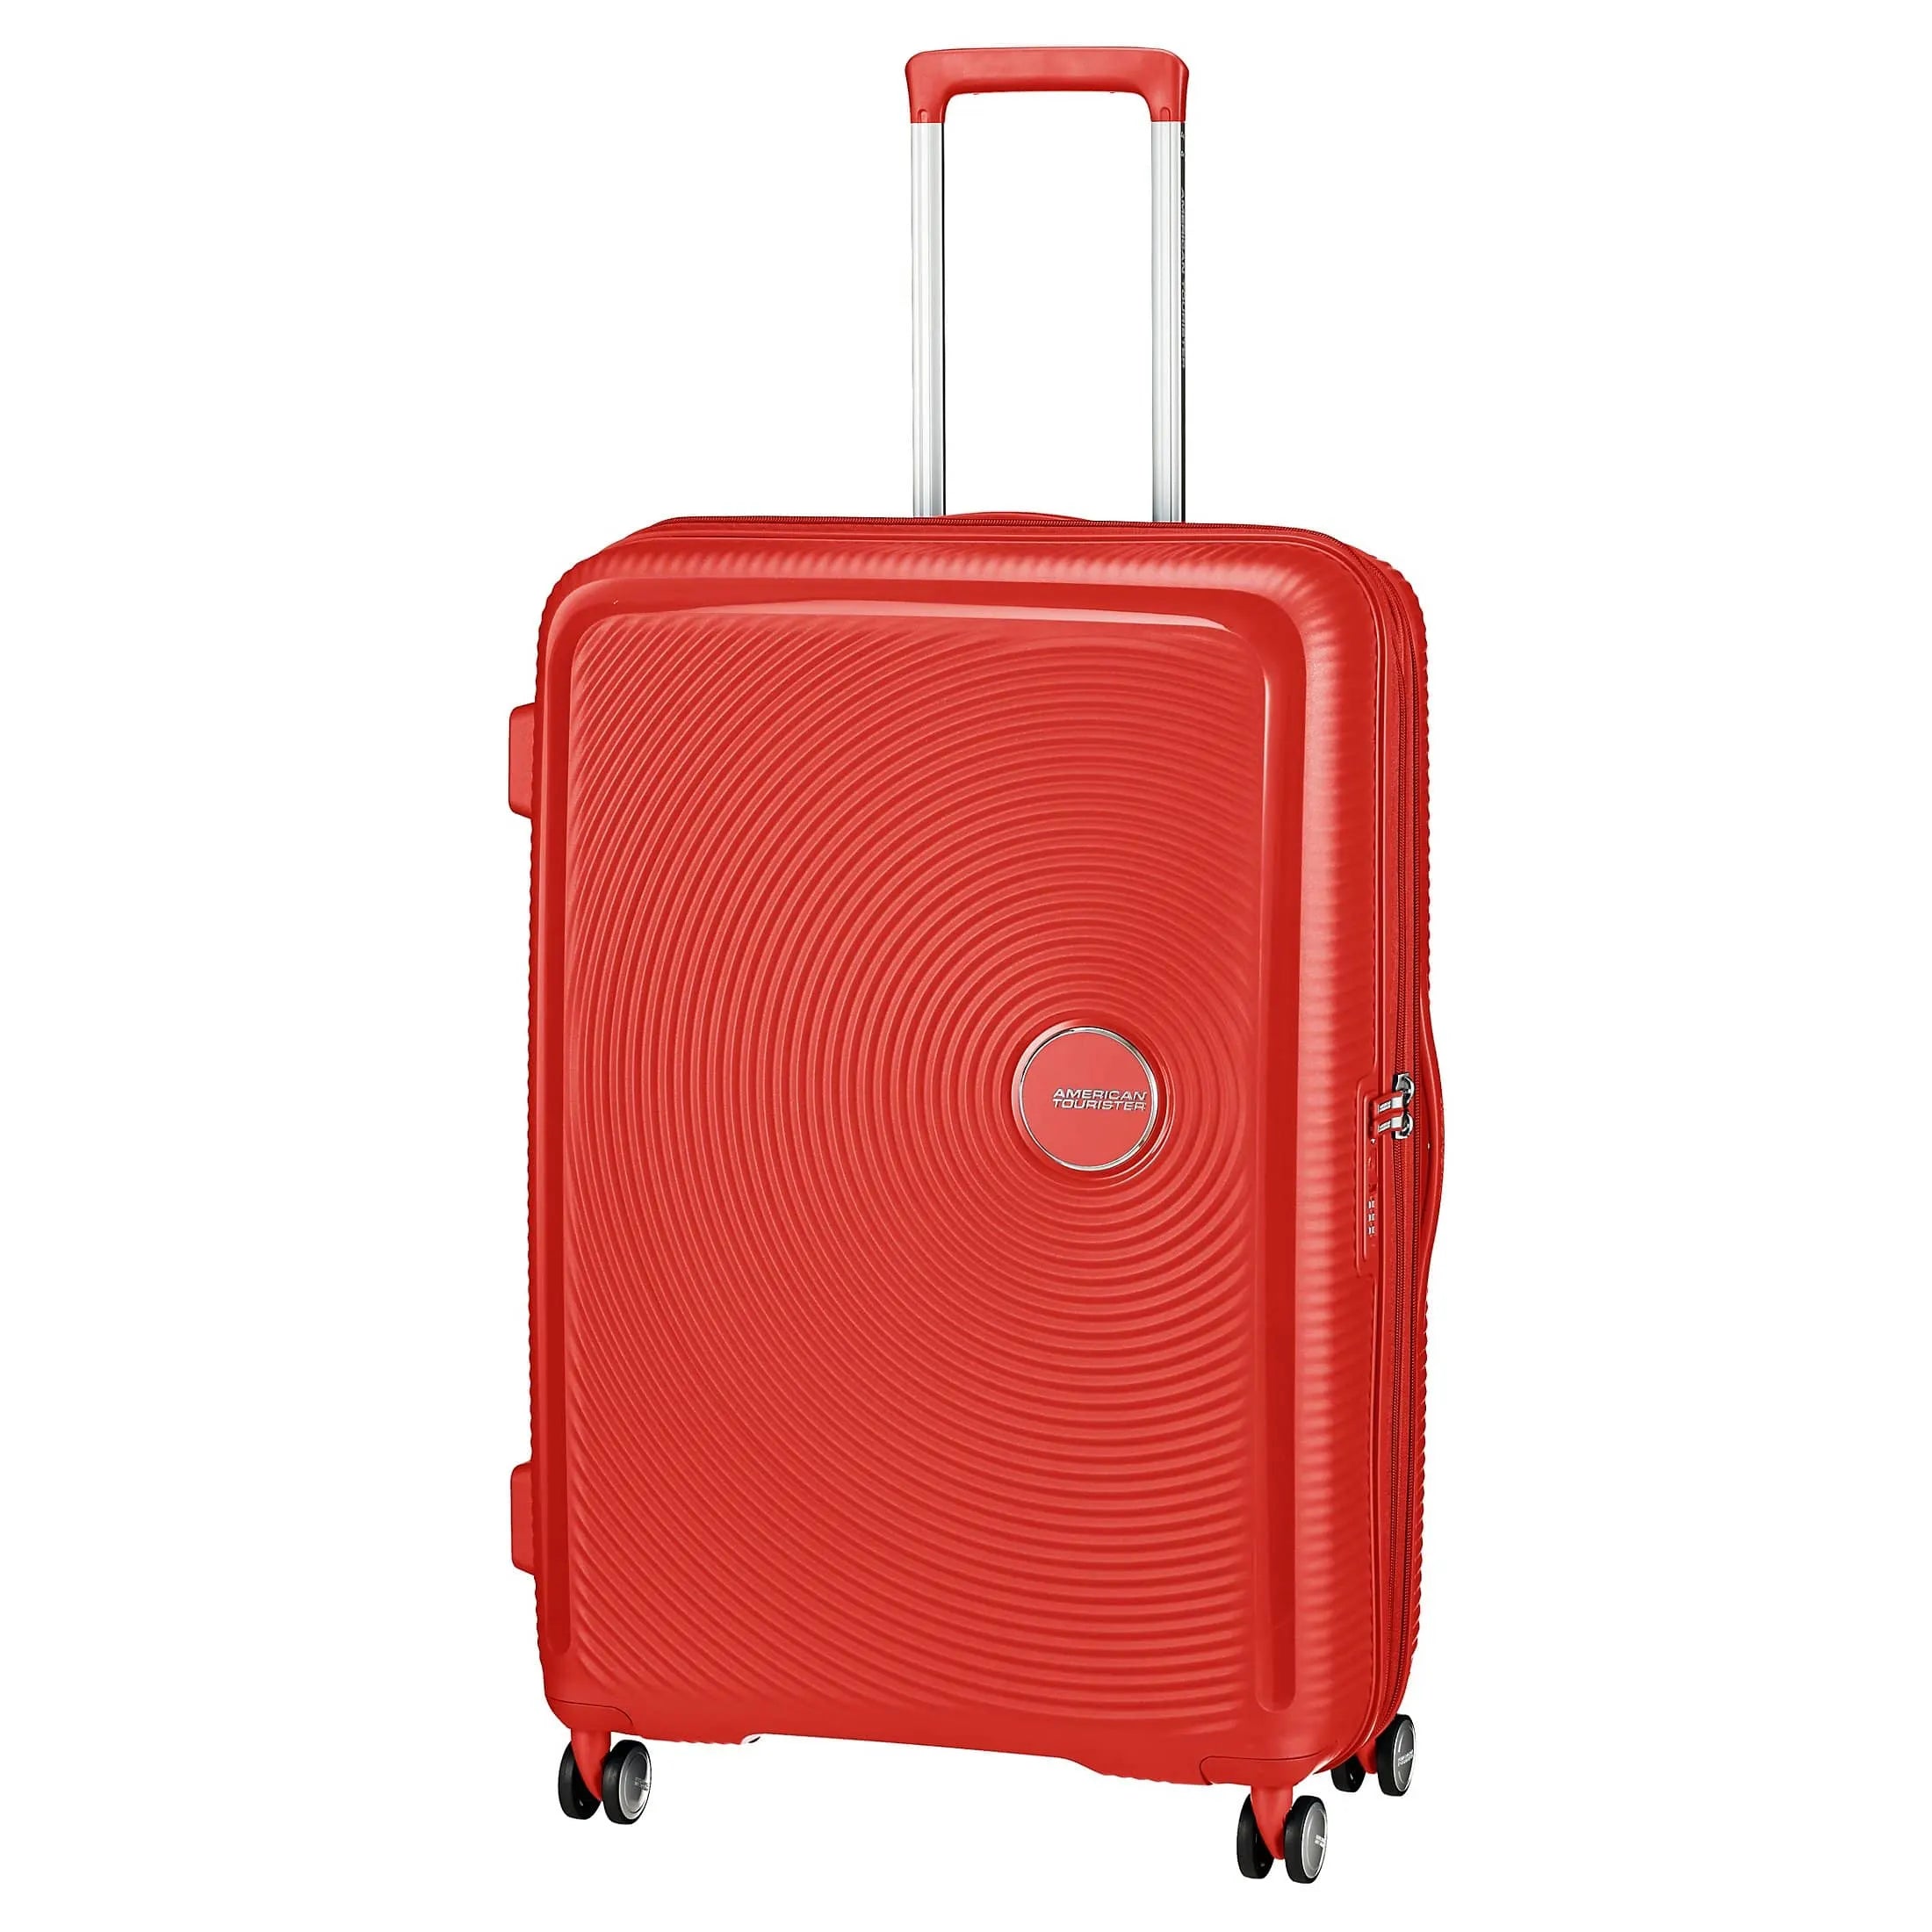 American Tourister Soundbox 4-Rollen-Trolley 77 cm - coral red